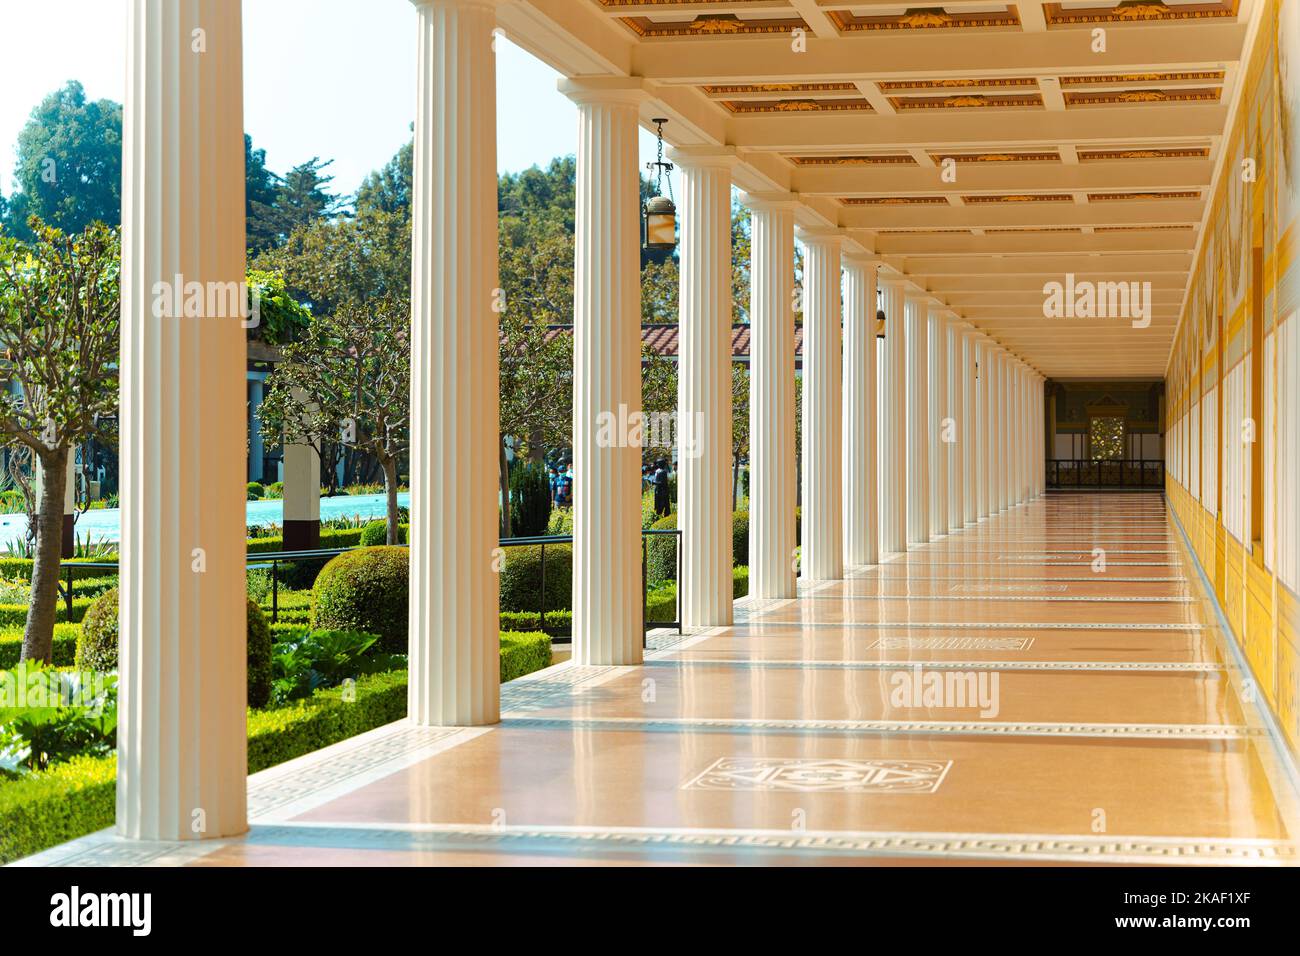 The luxurious J. Paul Getty villa museum hallway with white columns and a garden with green trees Stock Photo